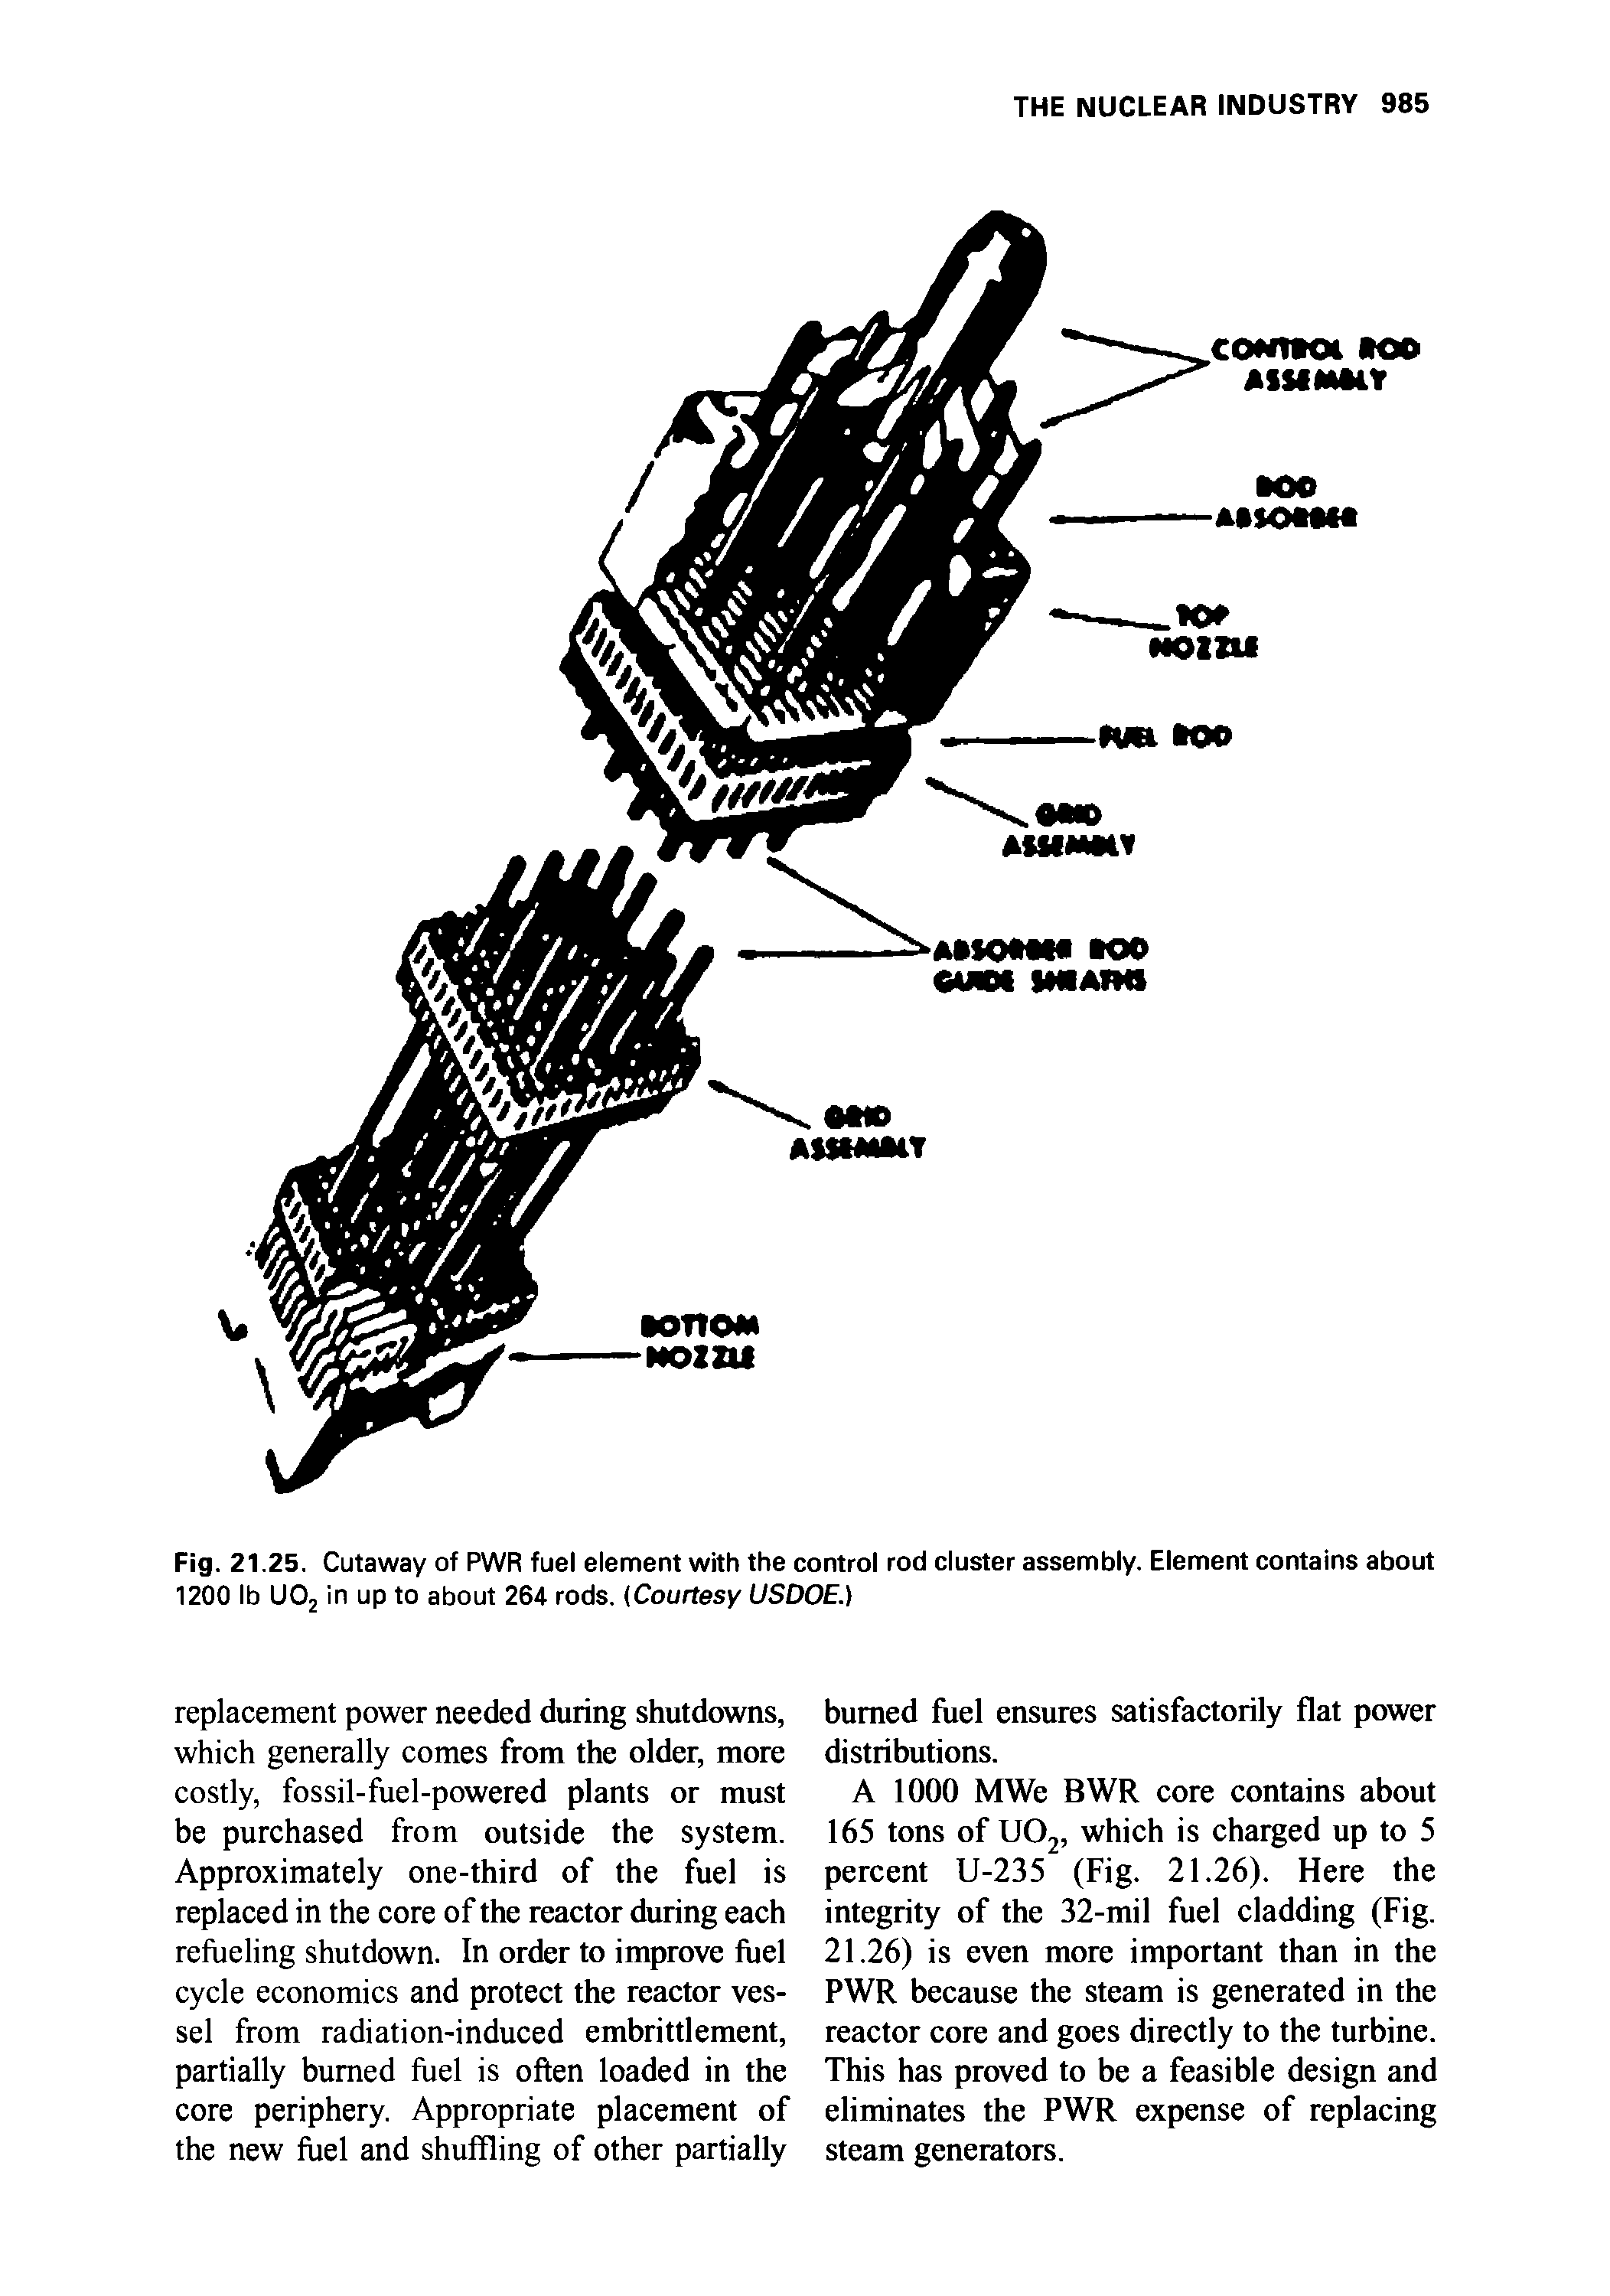 Fig. 21.25. Cutaway of PWR fuel element with the control rod cluster assembly. Element contains about 1200 lb U02 in up to about 264 rods. (Courtesy USDOE.)...